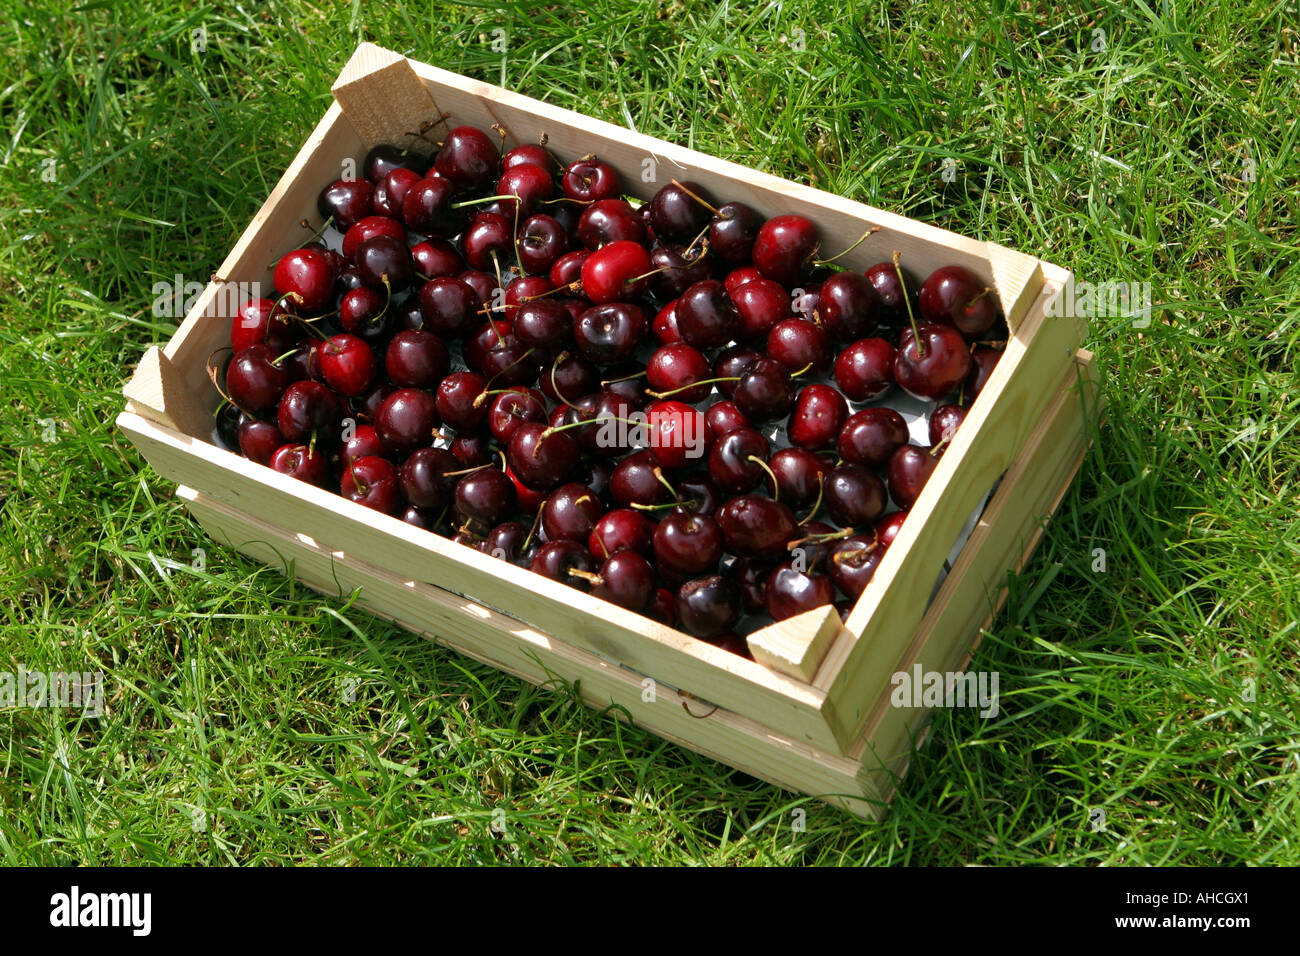 Freshly picked cherries in a wooden tray on grass Stock Photo